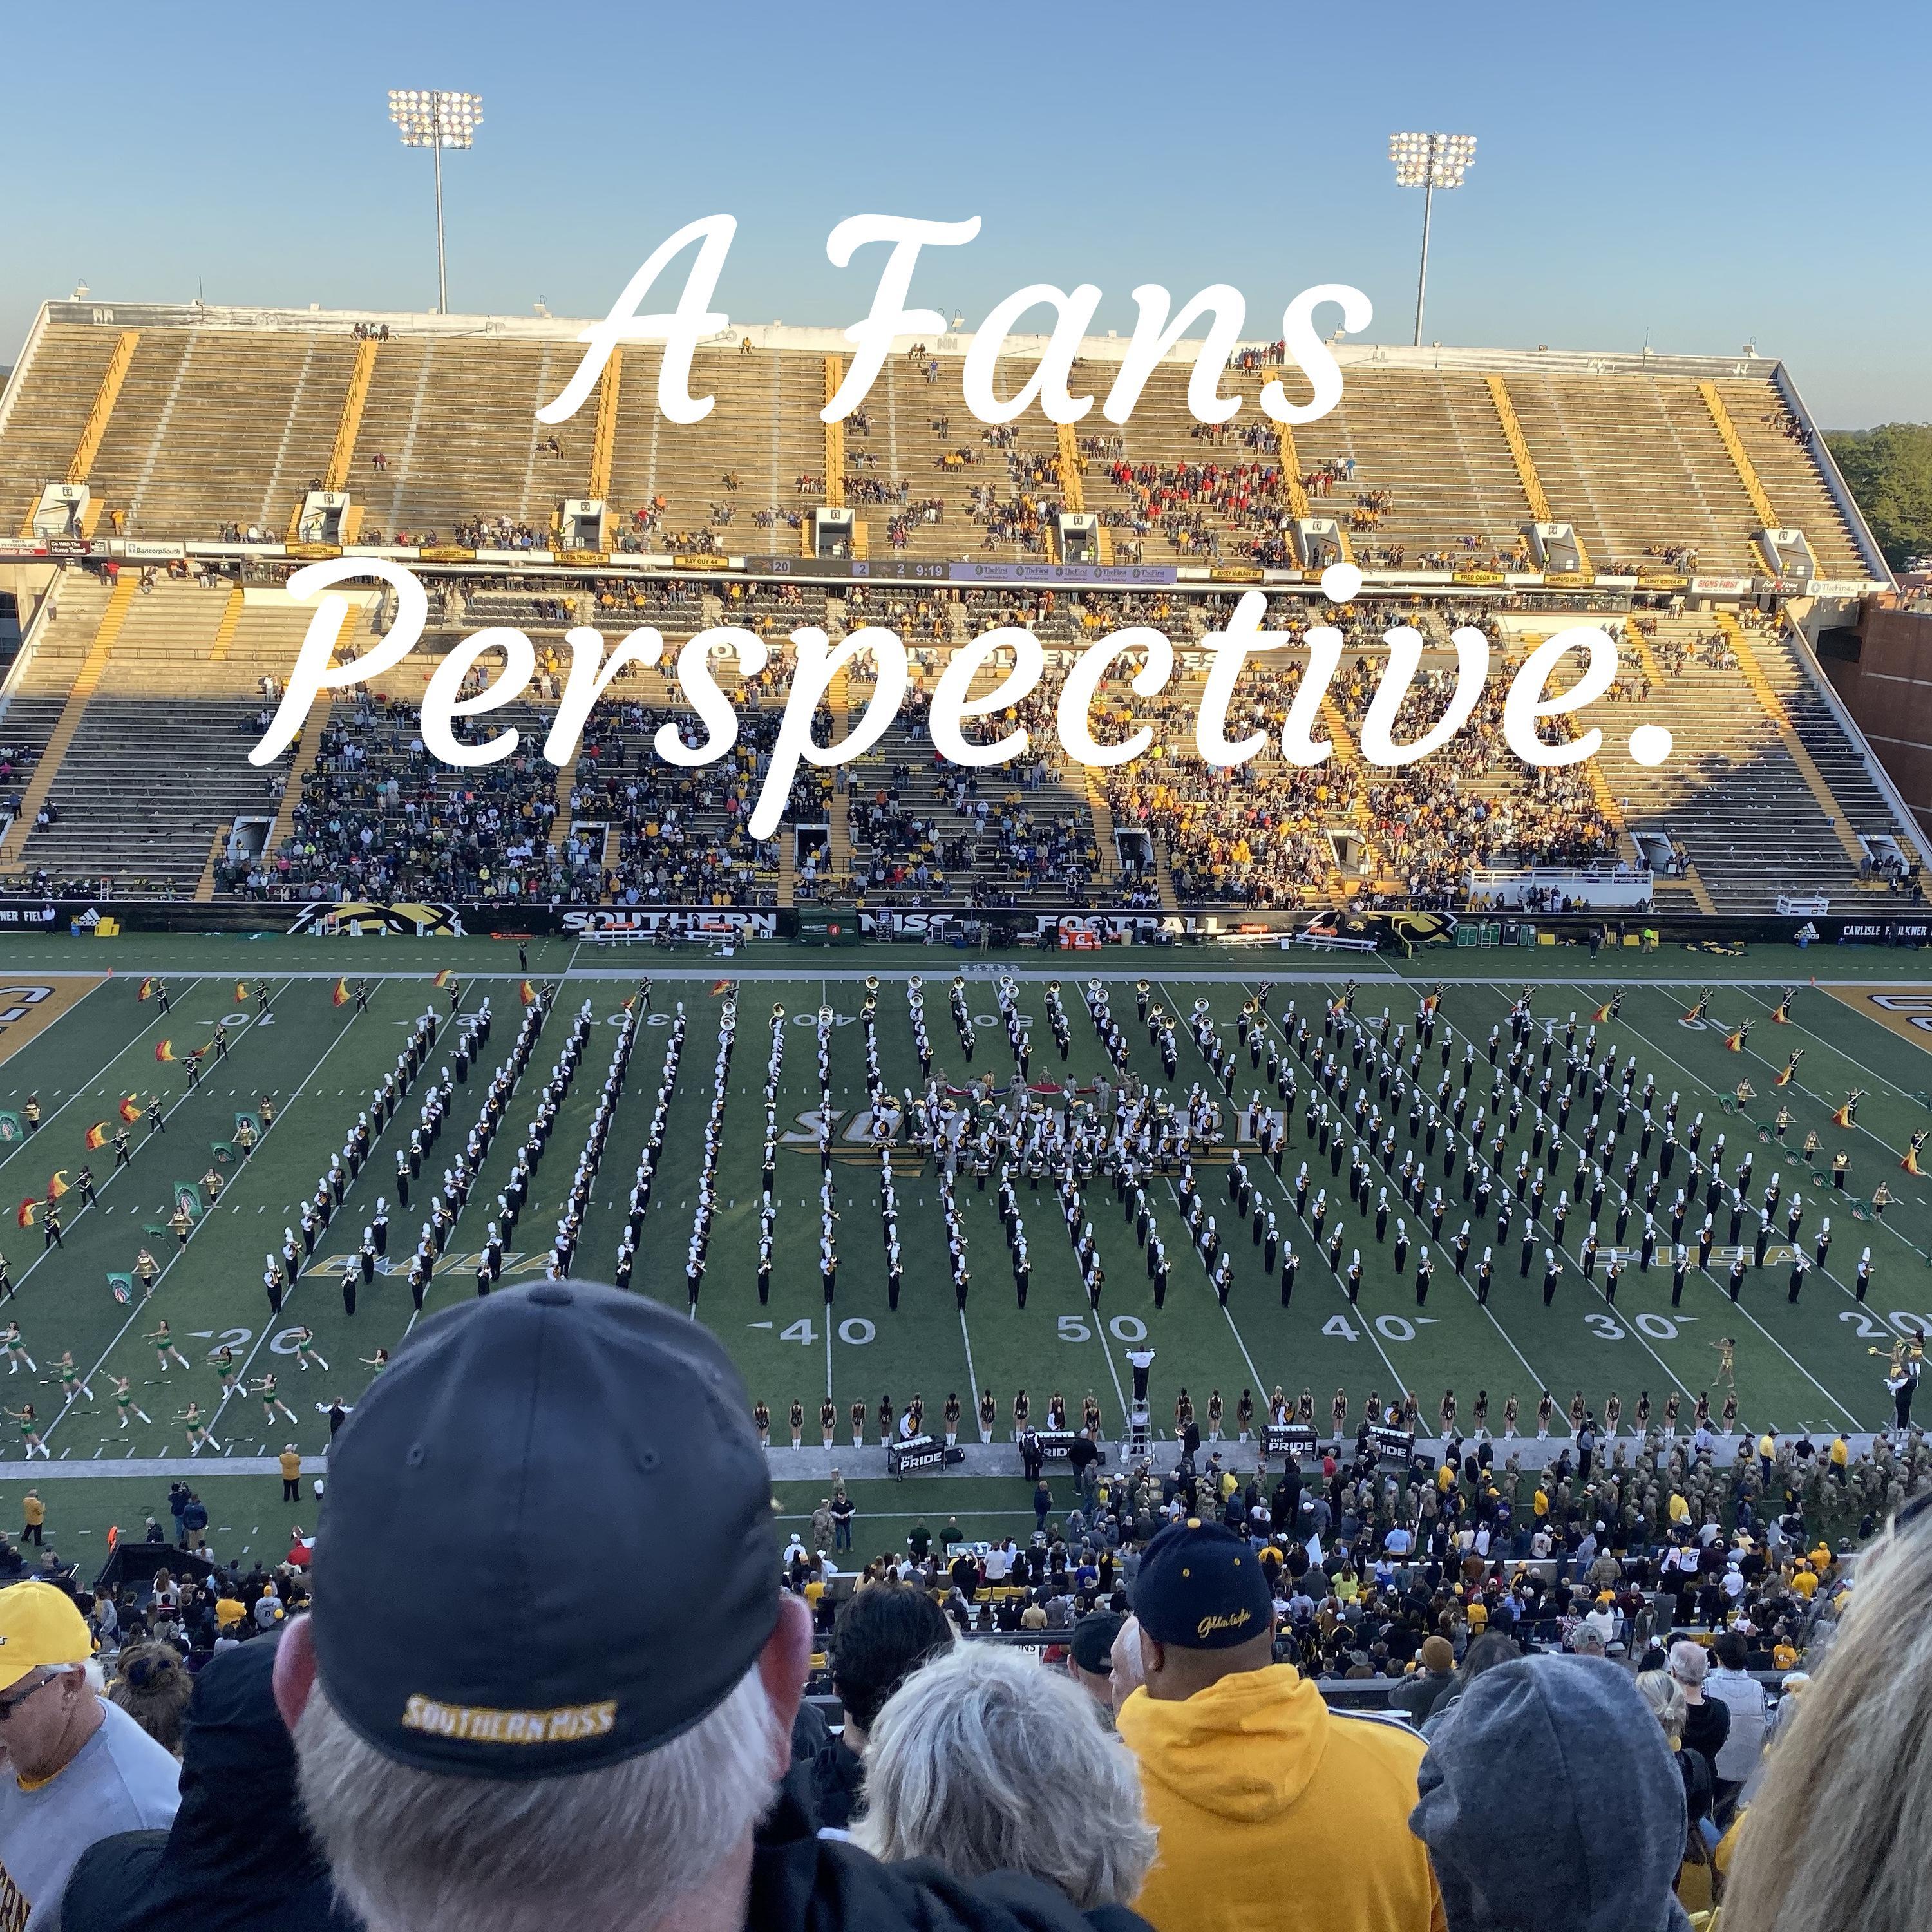 A Fans Perspective.